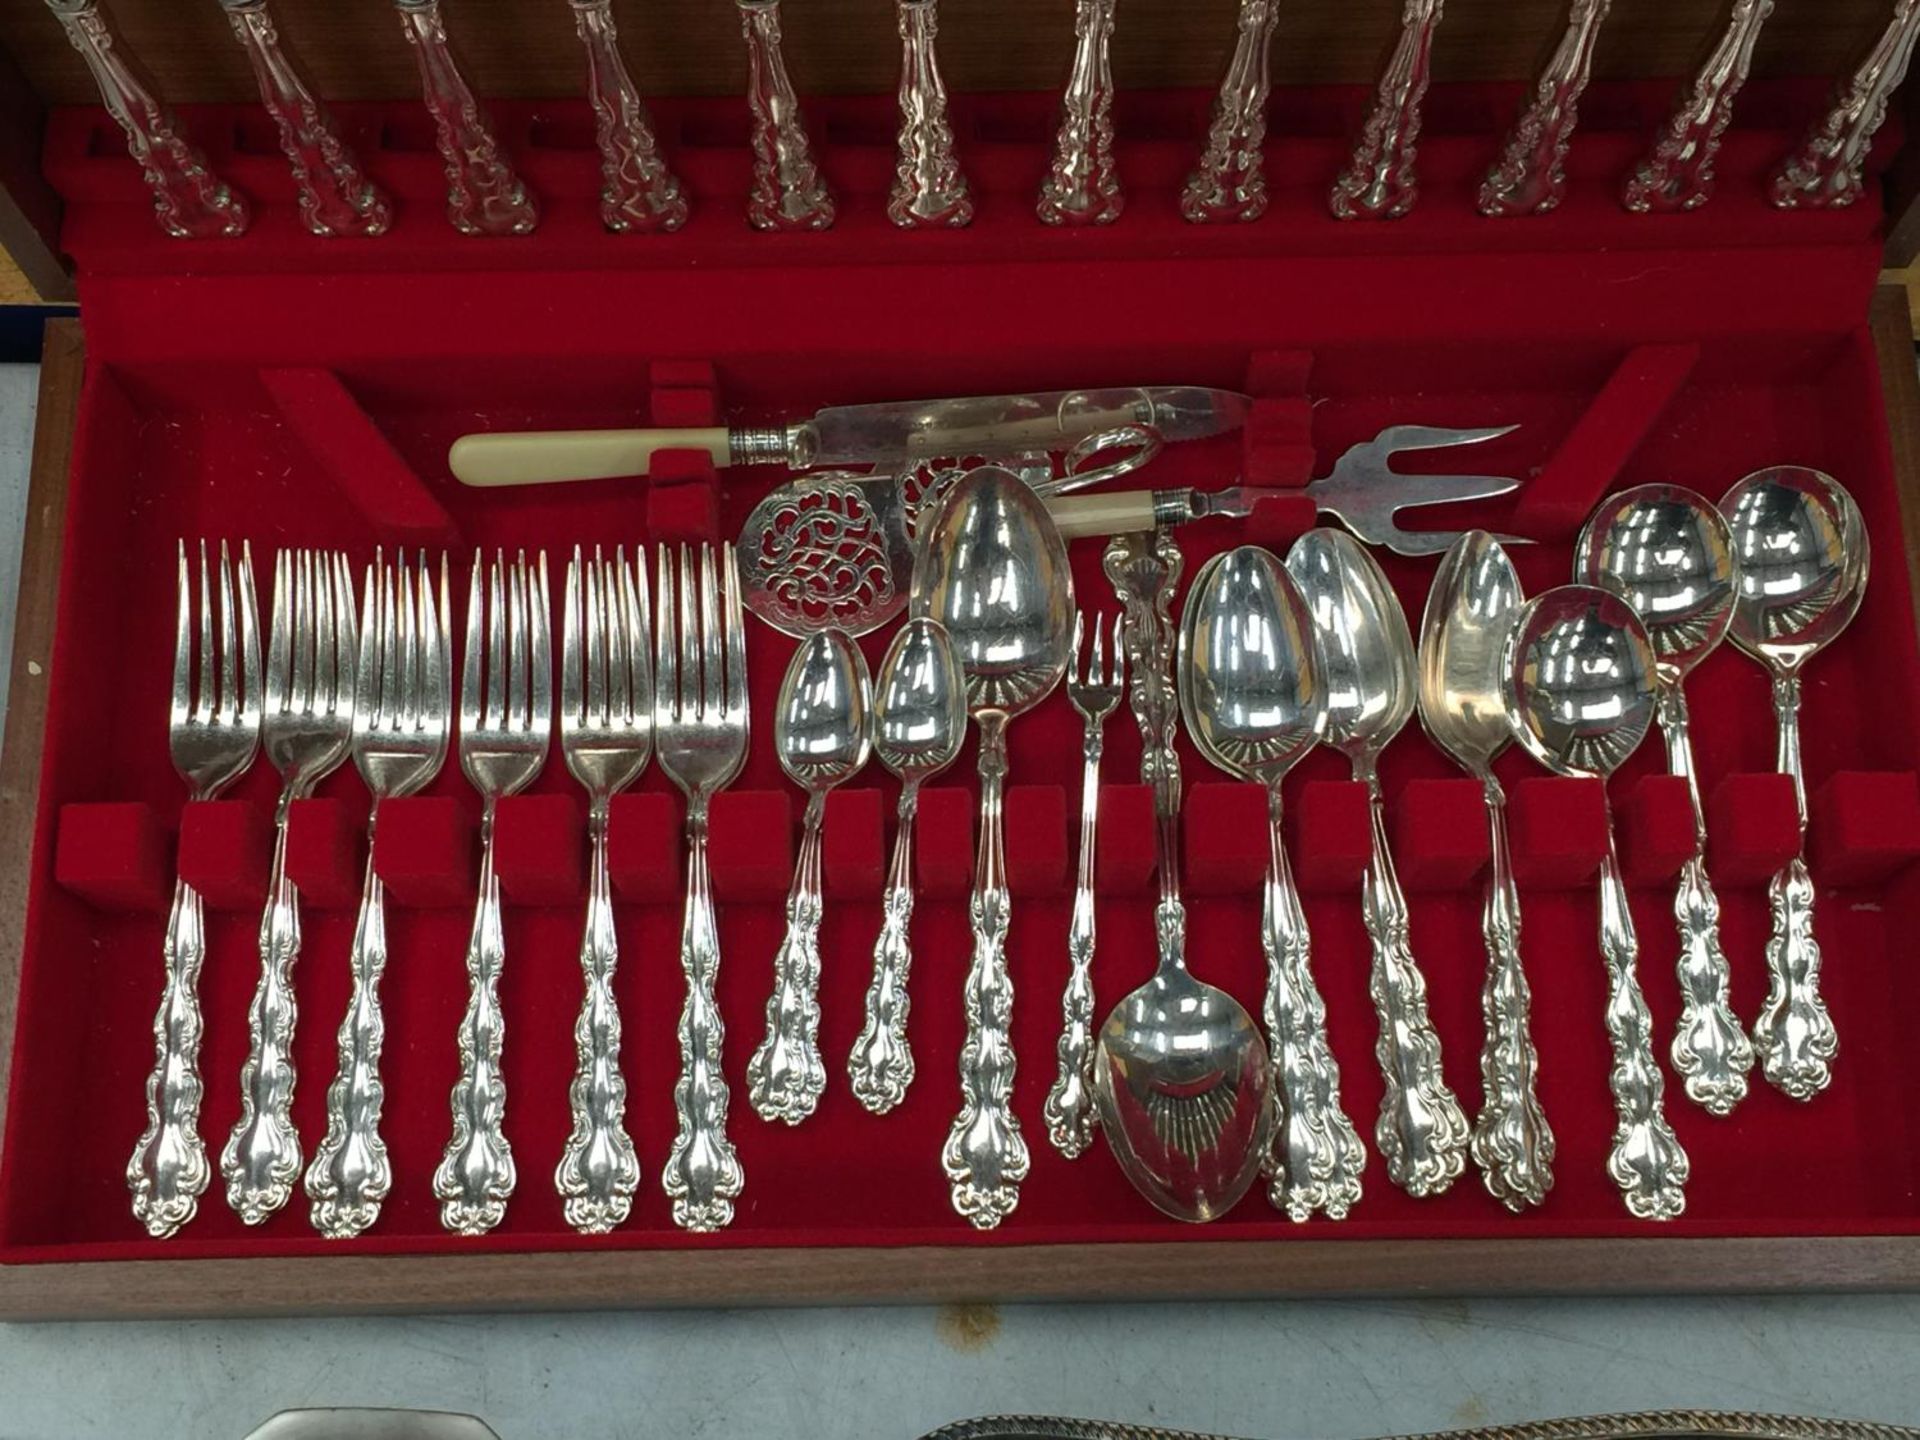 A 48 PIECE COMMUNITY FLATWARE SET IN DISPLAY CASE - Image 4 of 12